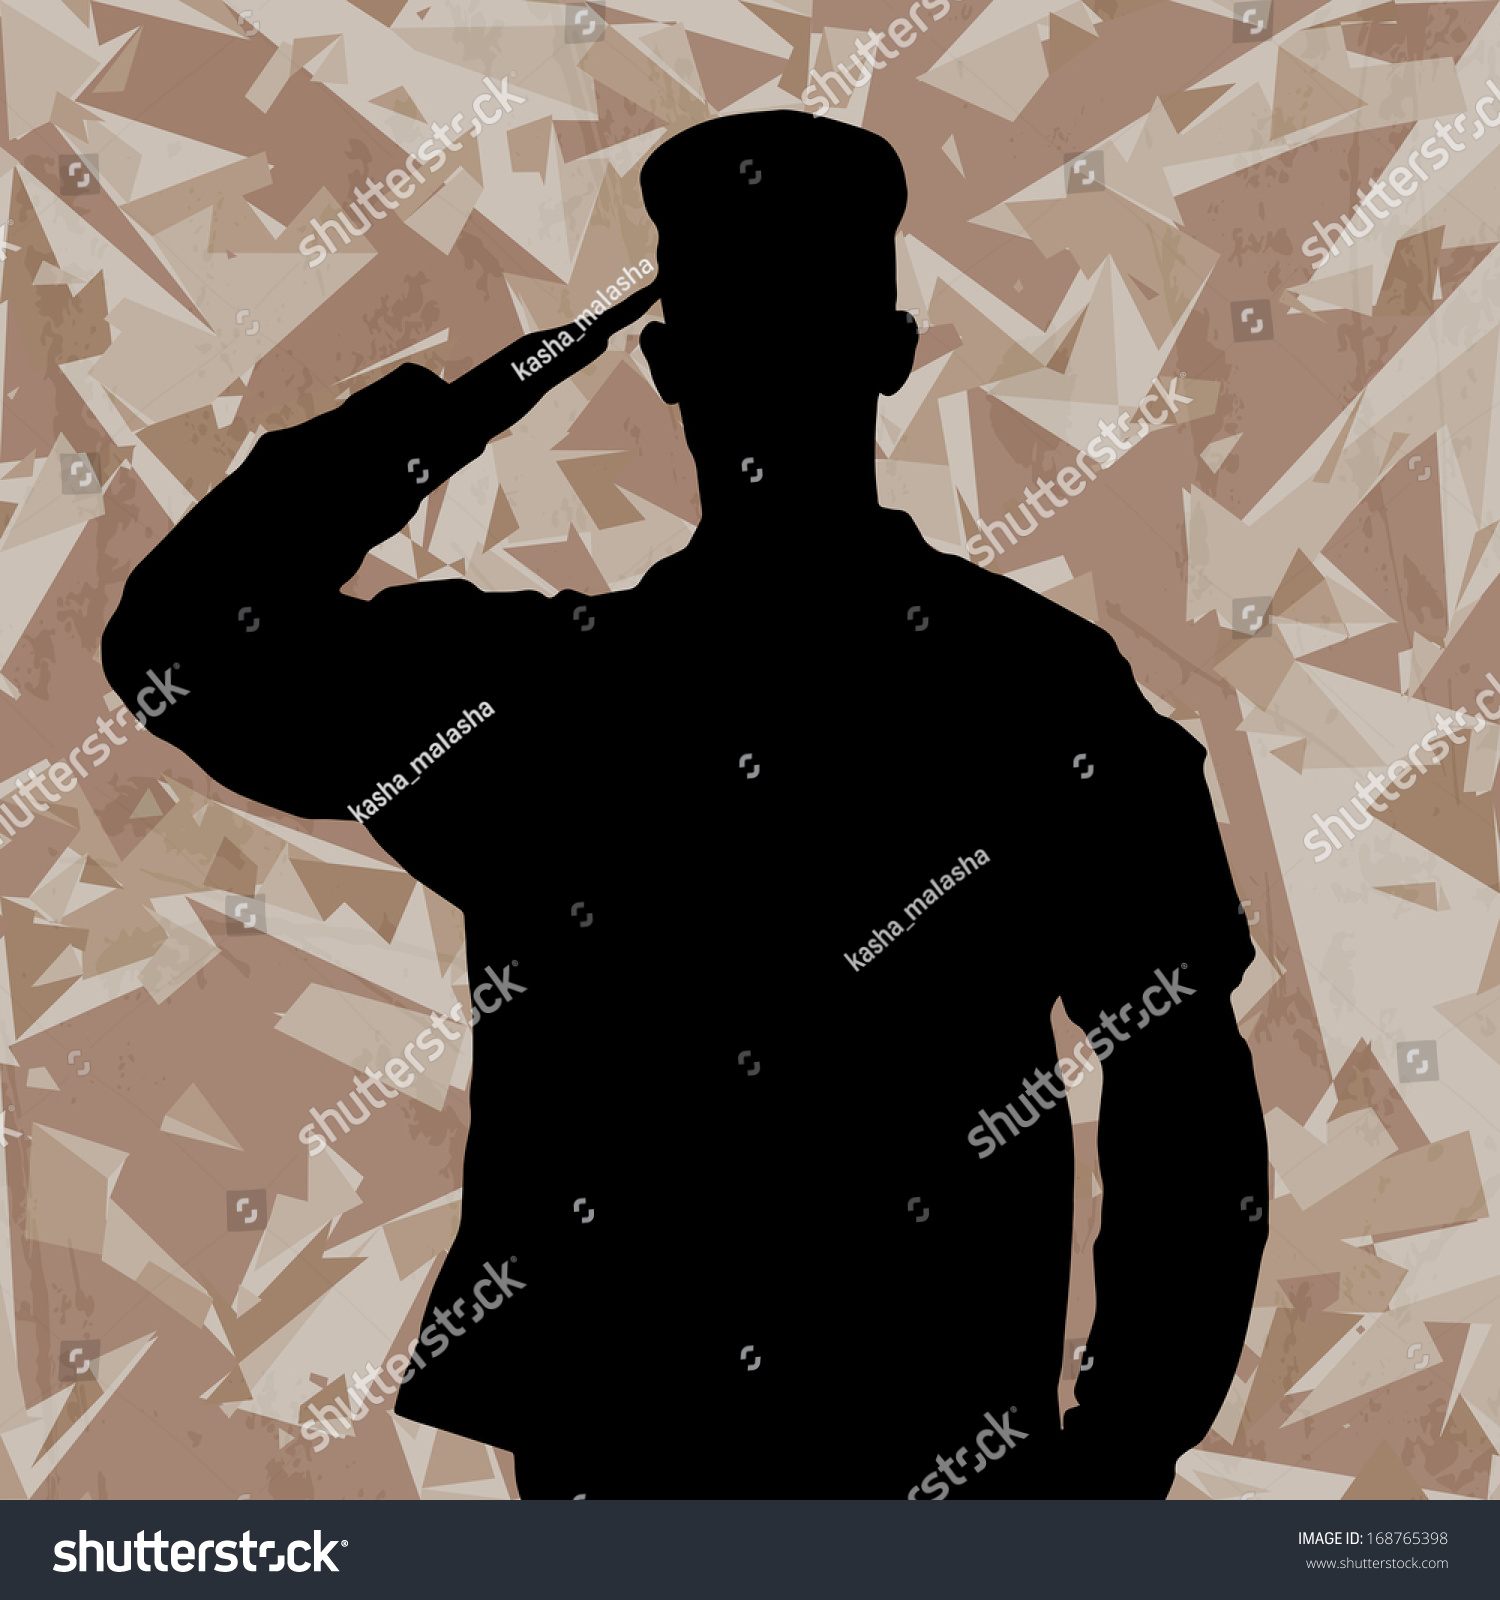 military background clipart - photo #34